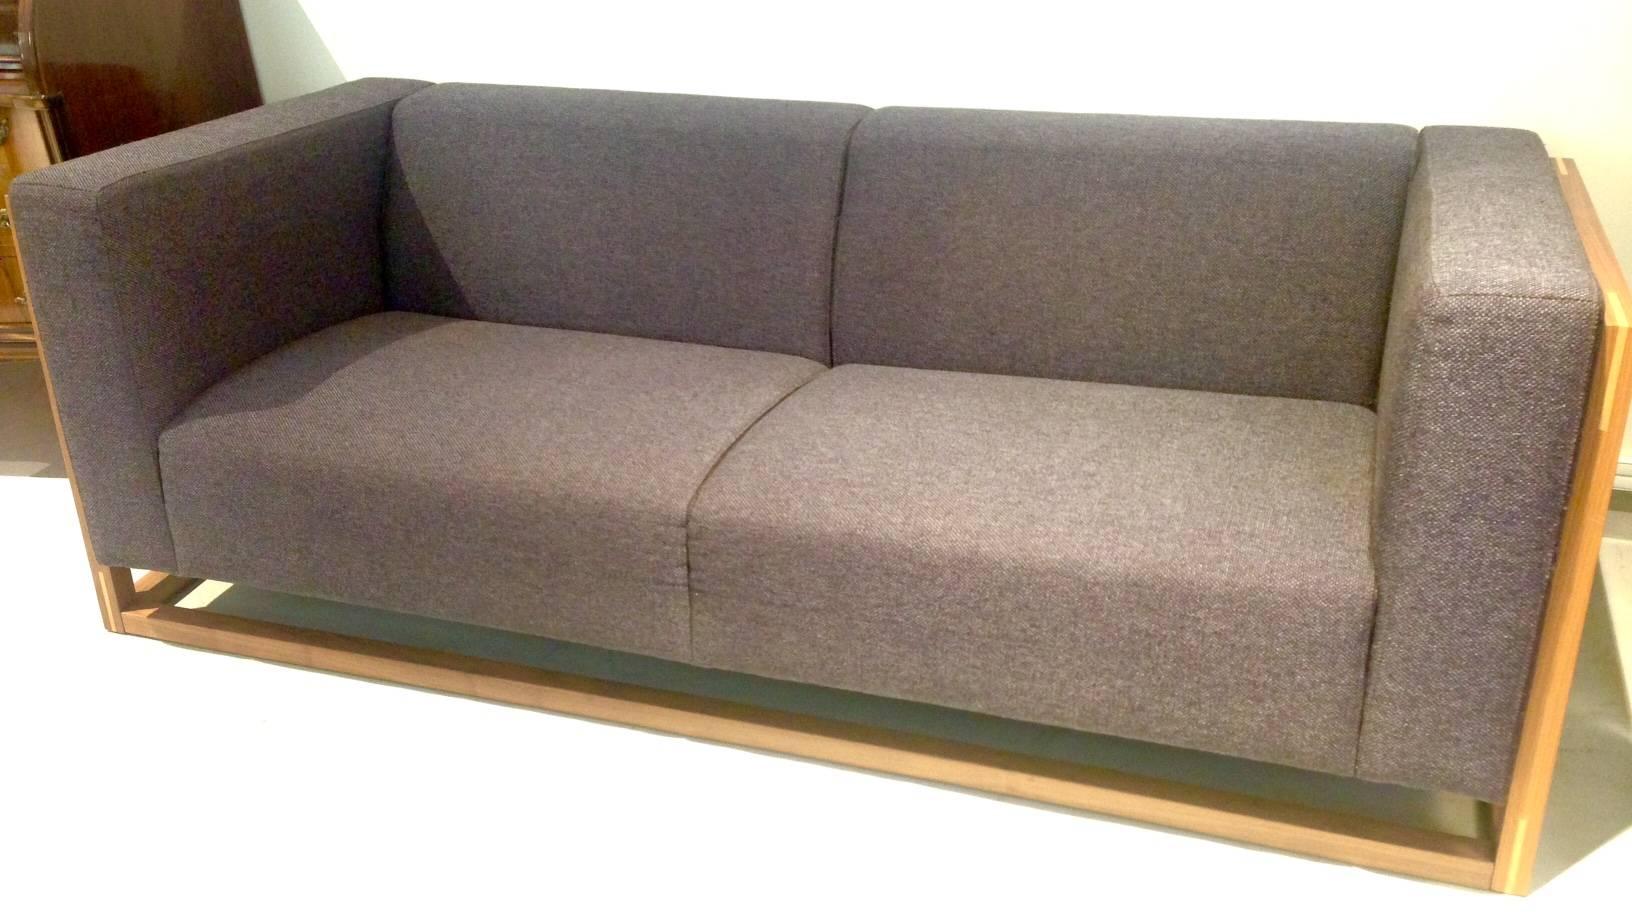 Angular three-seat sofa featuring solid walnut frame with pale wood inlay, produced by Bolia in Denmark. Thick dark bluish-grey woven fabric upholstery. Beautiful Minimalist shape, comfortable seat.